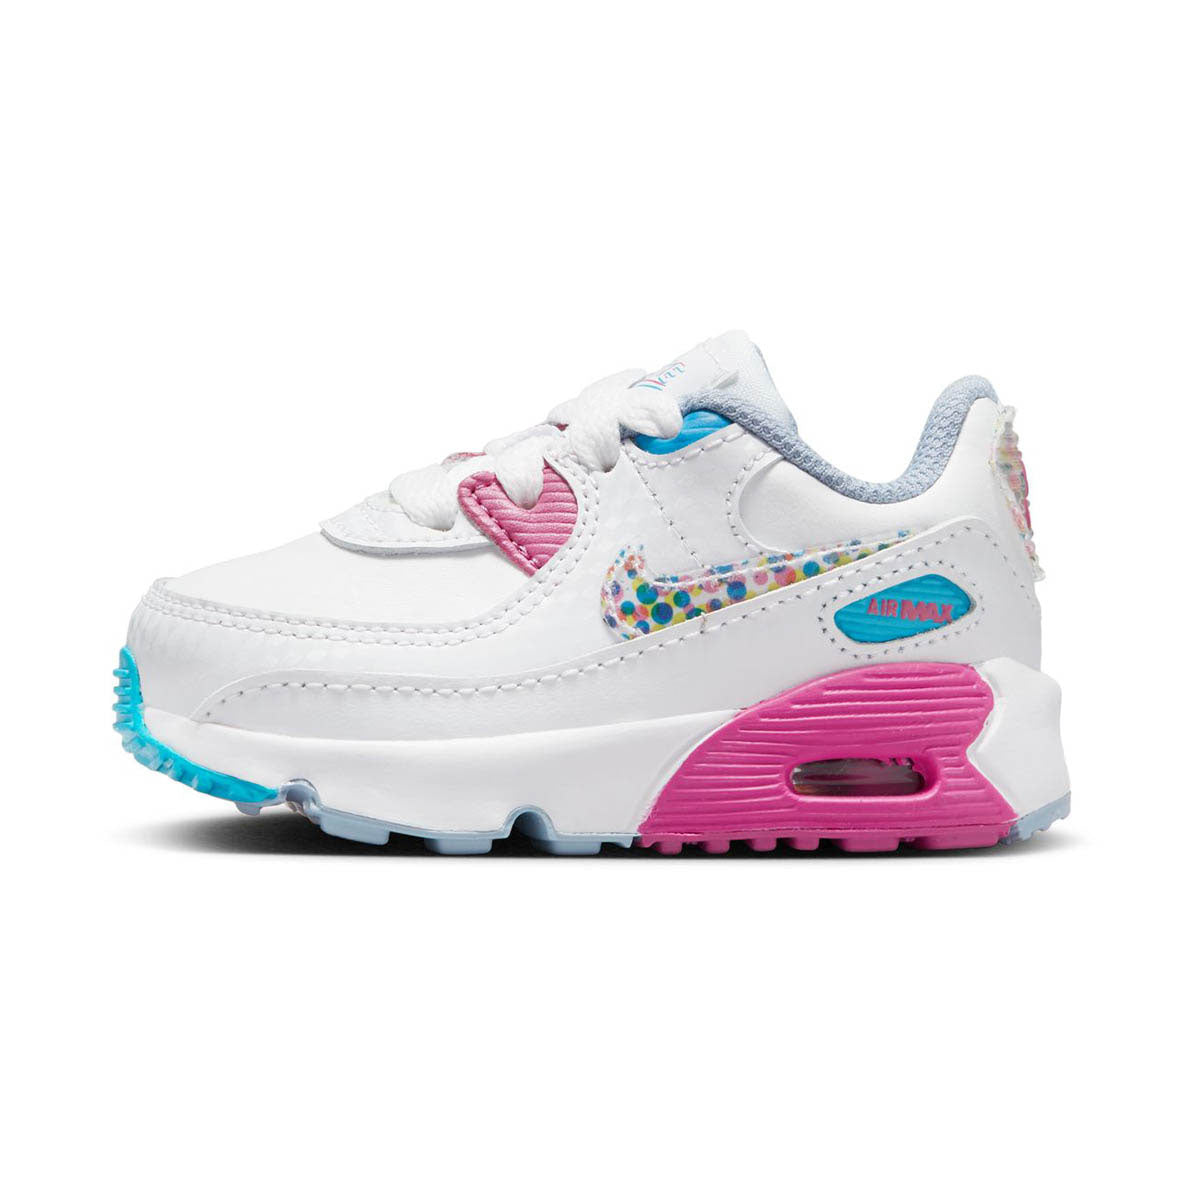 Nike Air 90 LTR Baby/Toddler Shoes - Millennium Shoes